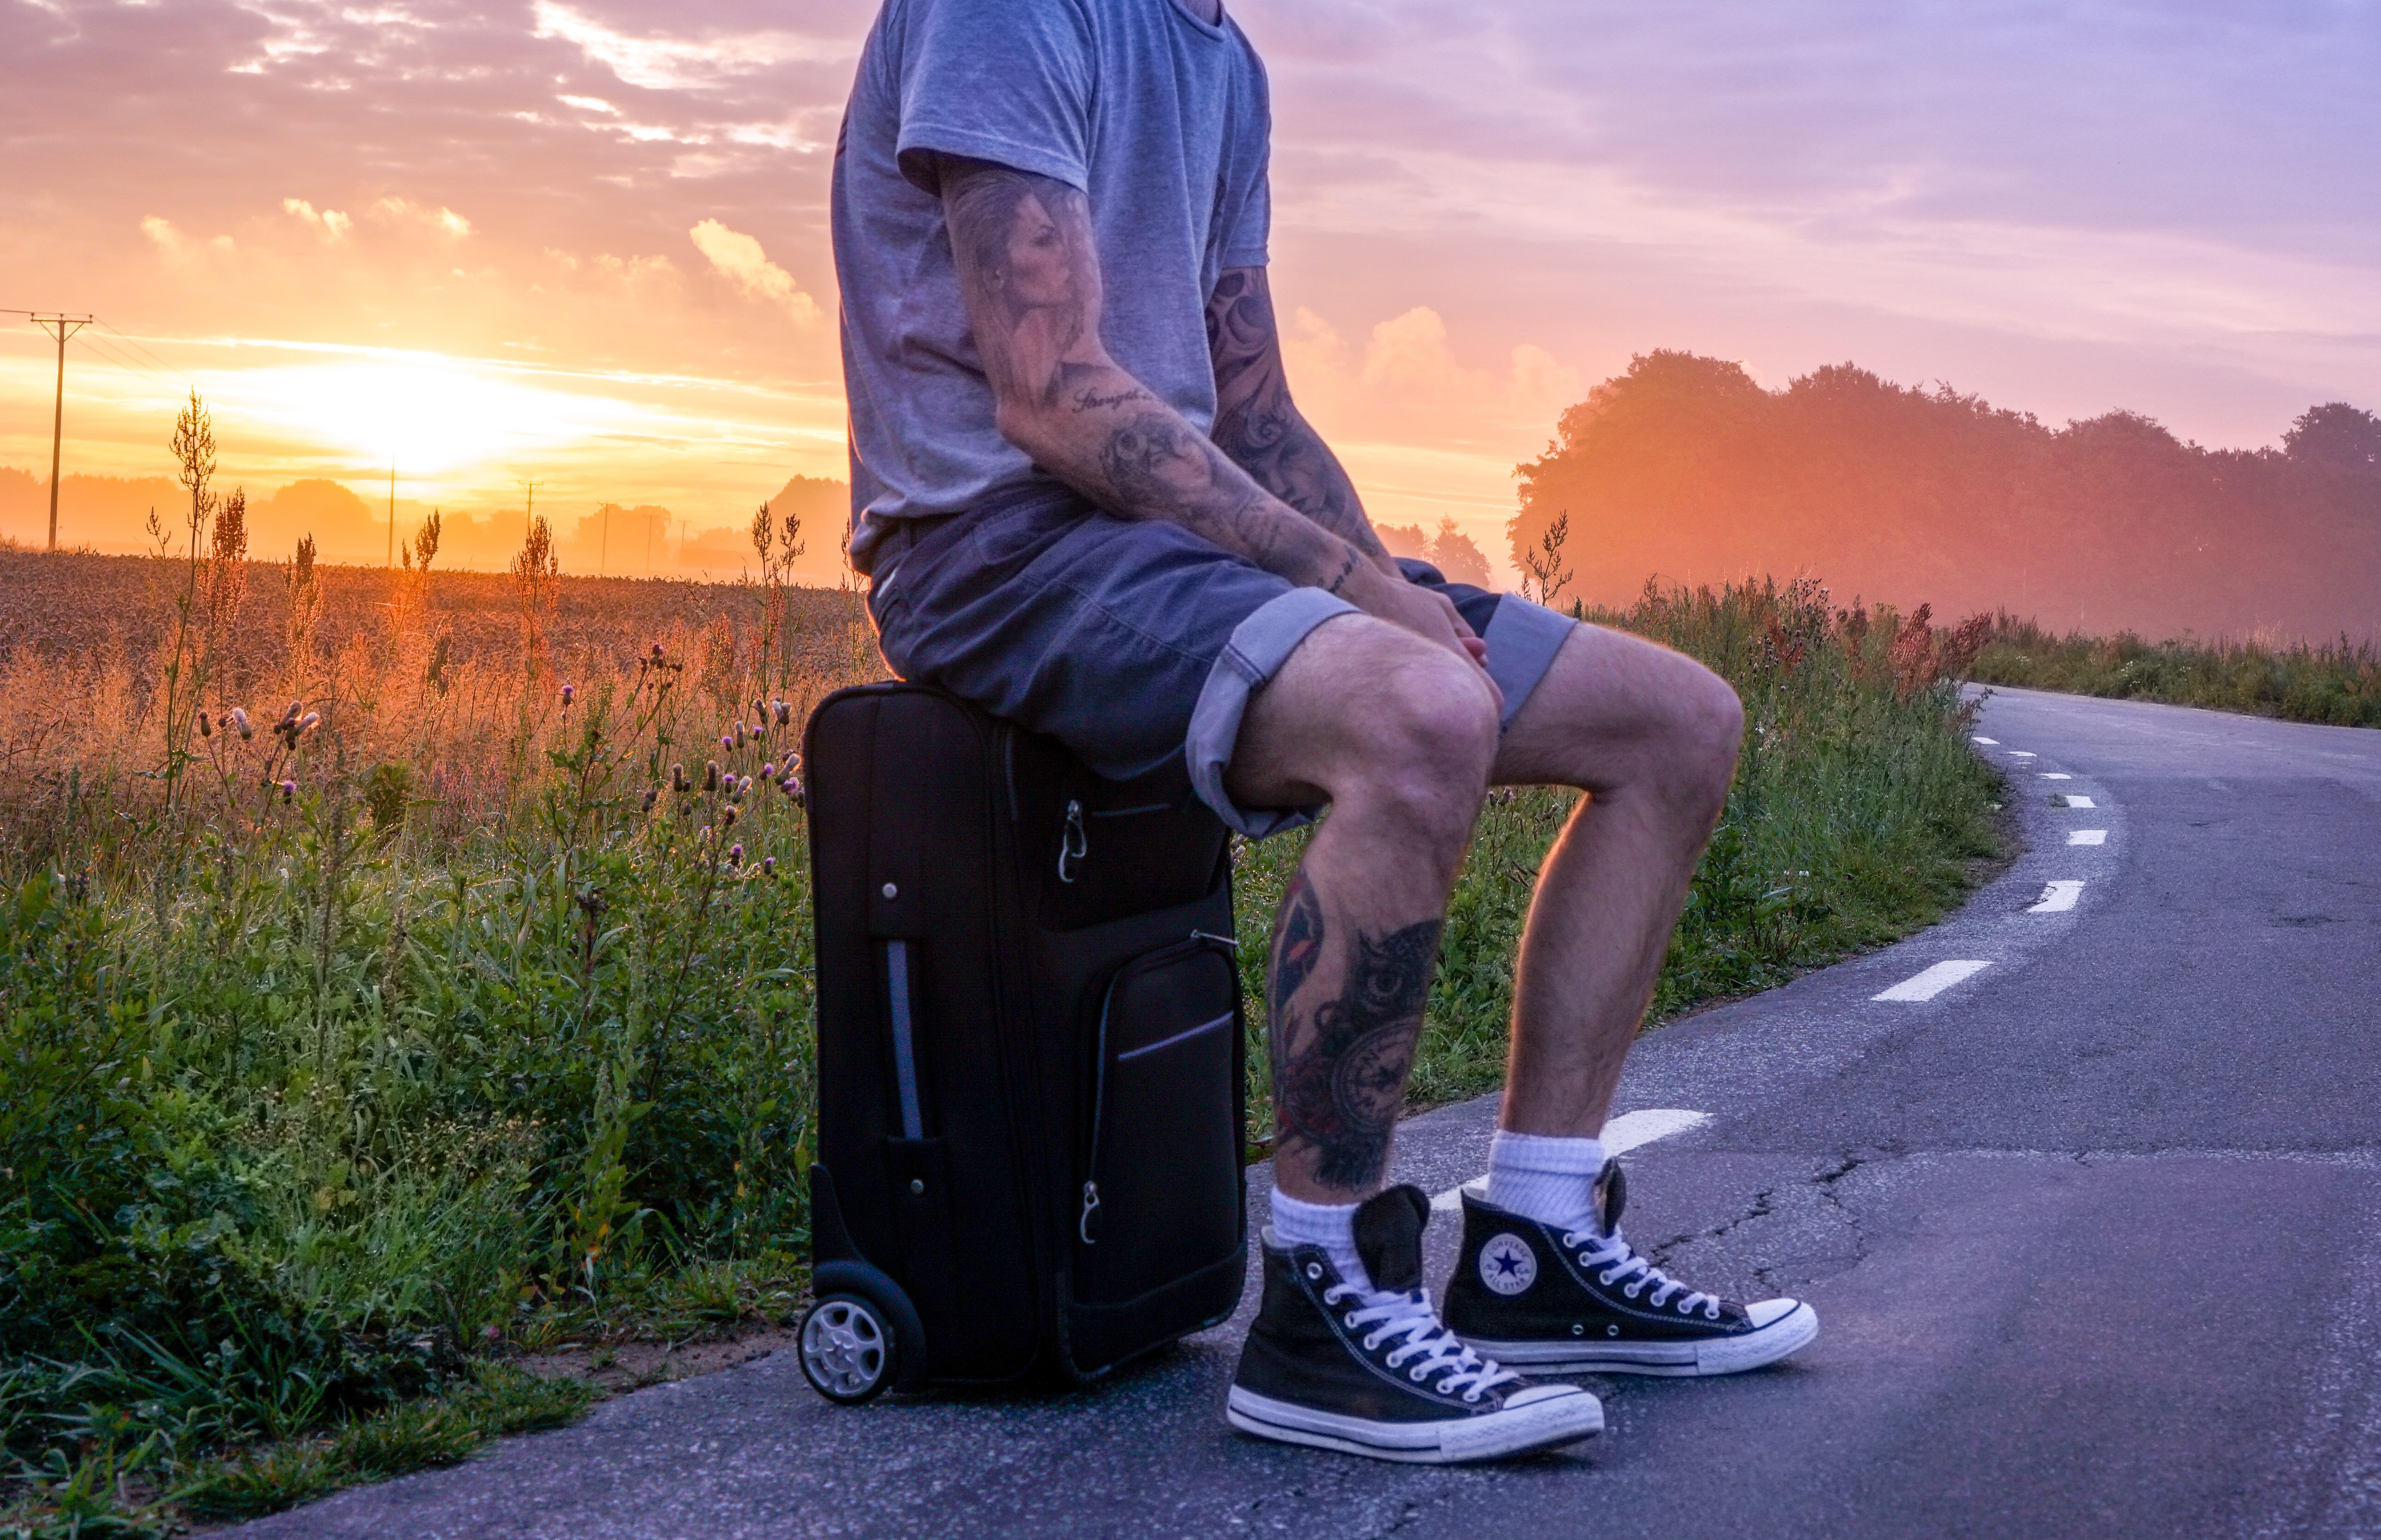 129784 Screensavers and Wallpapers Man for phone. Download sunset, miscellanea, miscellaneous, man, tattoo, tattoos, suitcase pictures for free